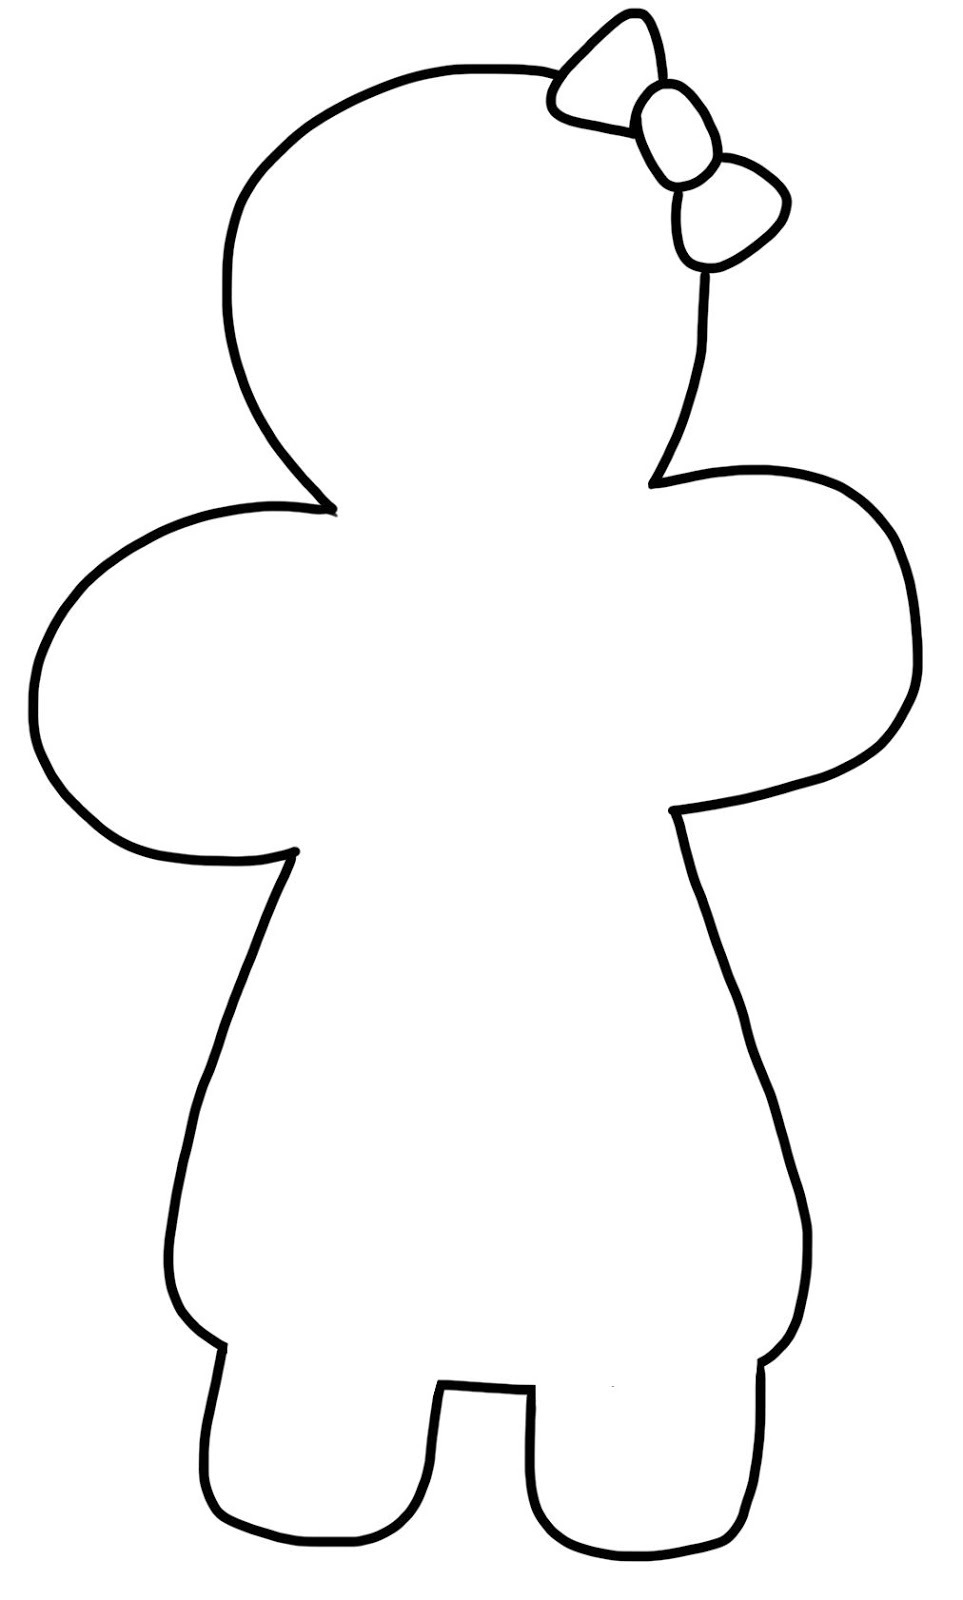 gingerbread-man-outline-free-download-on-clipartmag